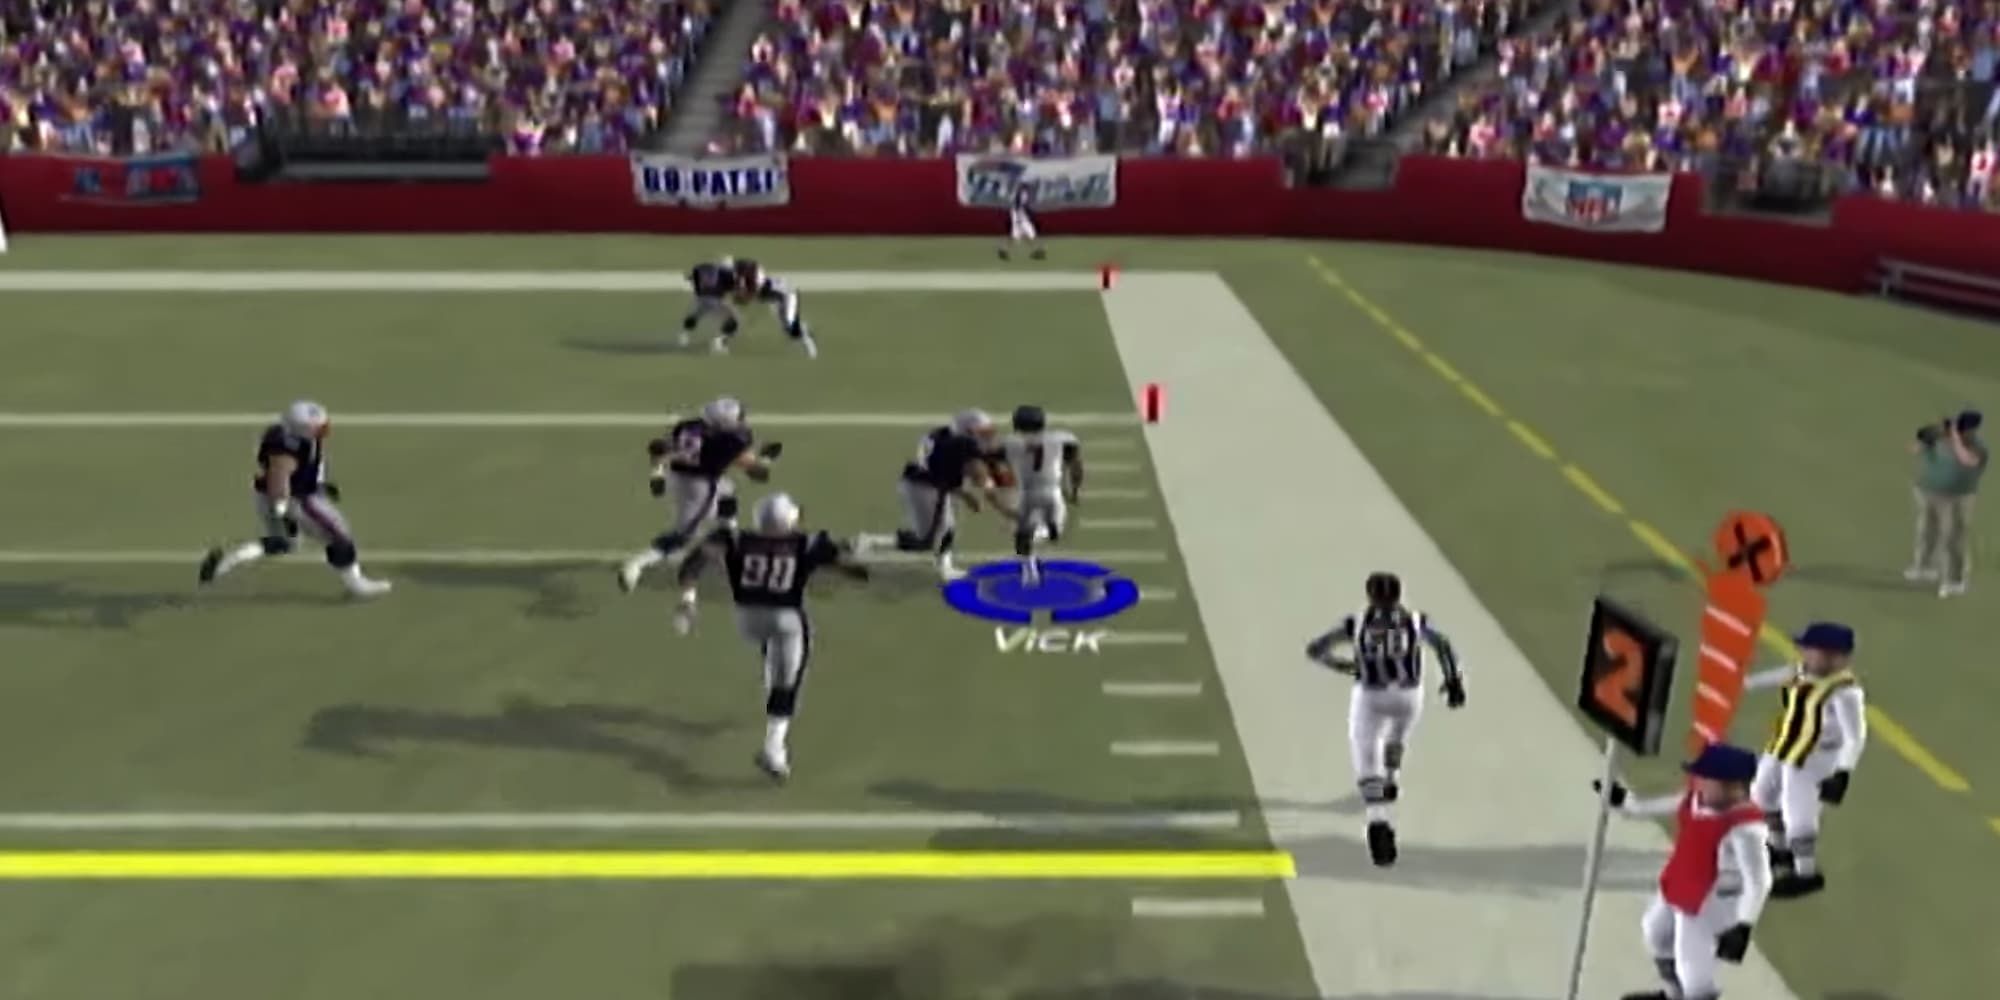 Michael Vick is being tackled by a New England Patriots player at Madden 2004.